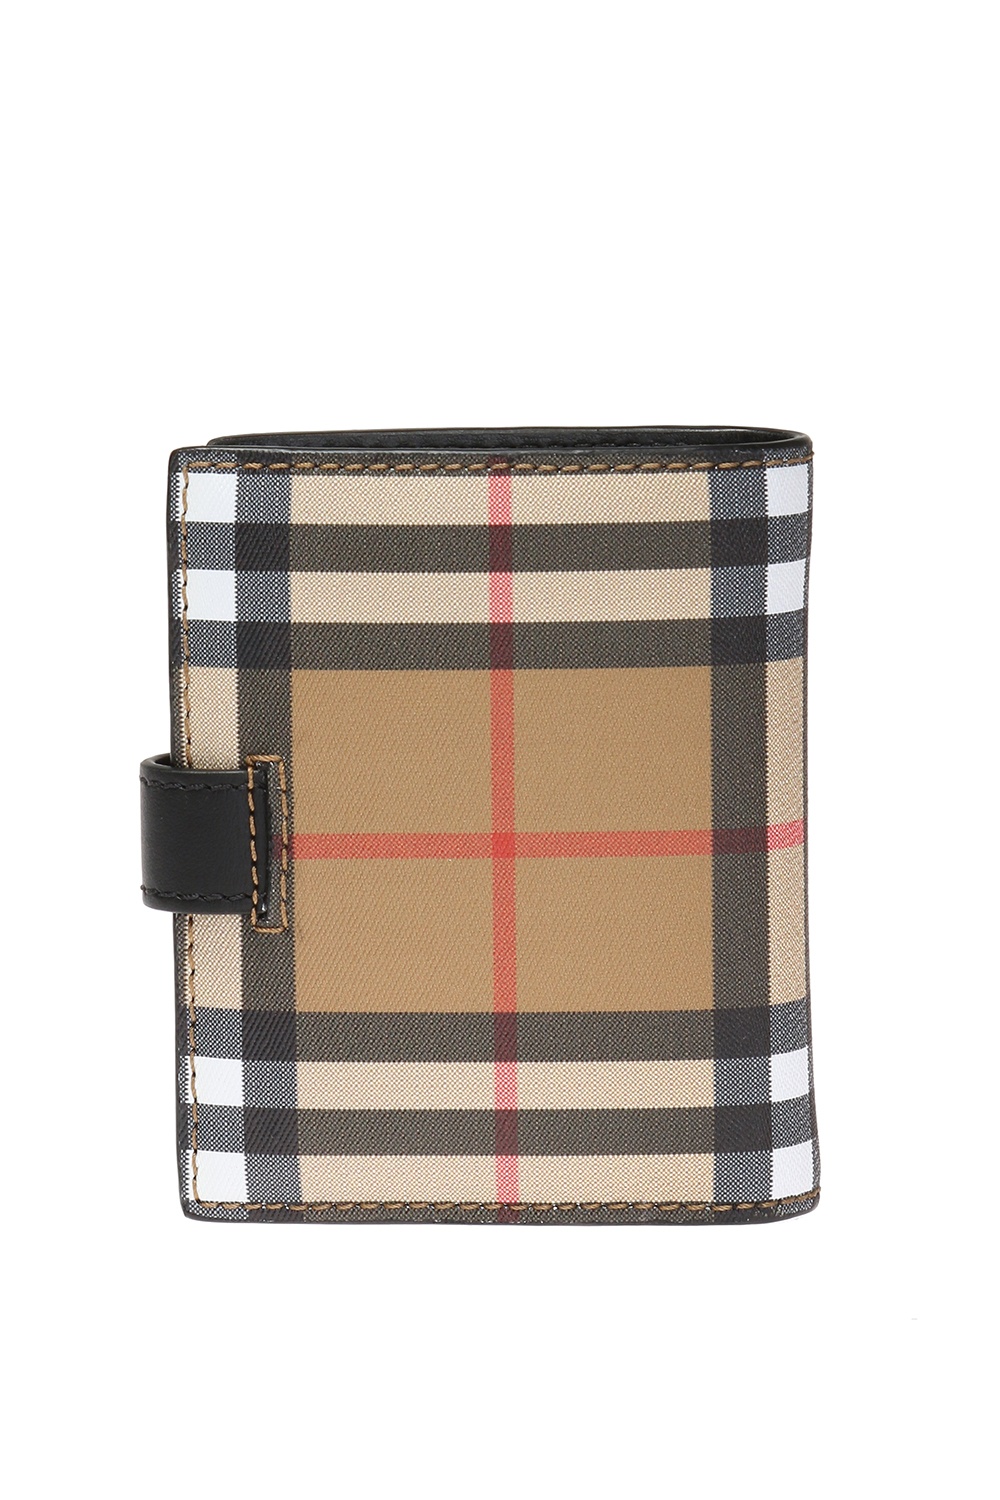 BURBERRY Check And Leather Folding Card Case